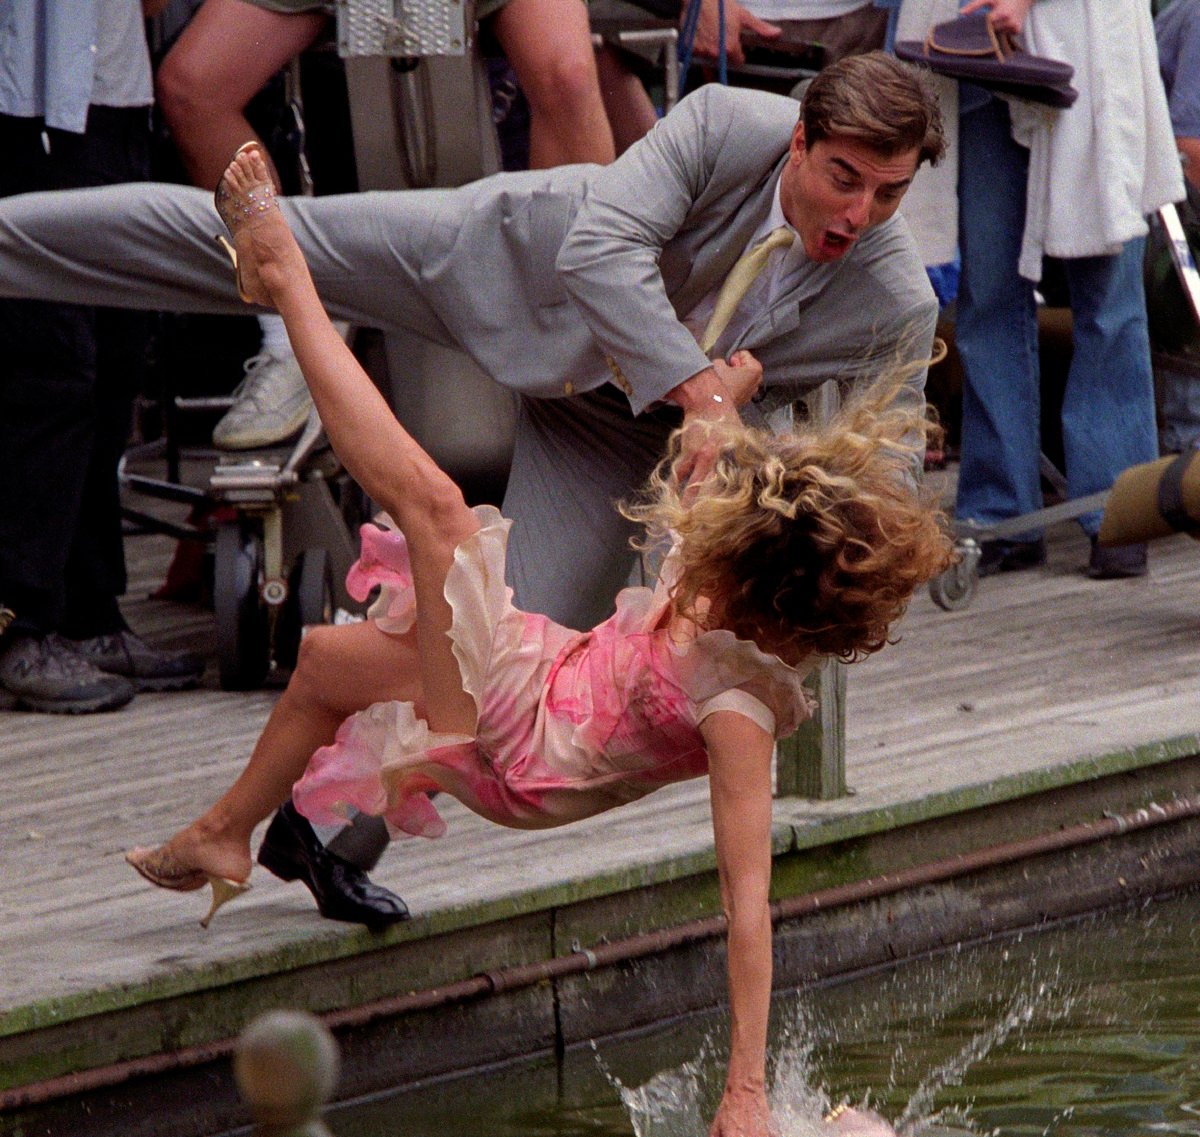 Chris Noth as Mr. Big and Sarah Jessica Parker as Carrie Bradshaw fall in a pond during season 4 of 'Sex and the City'